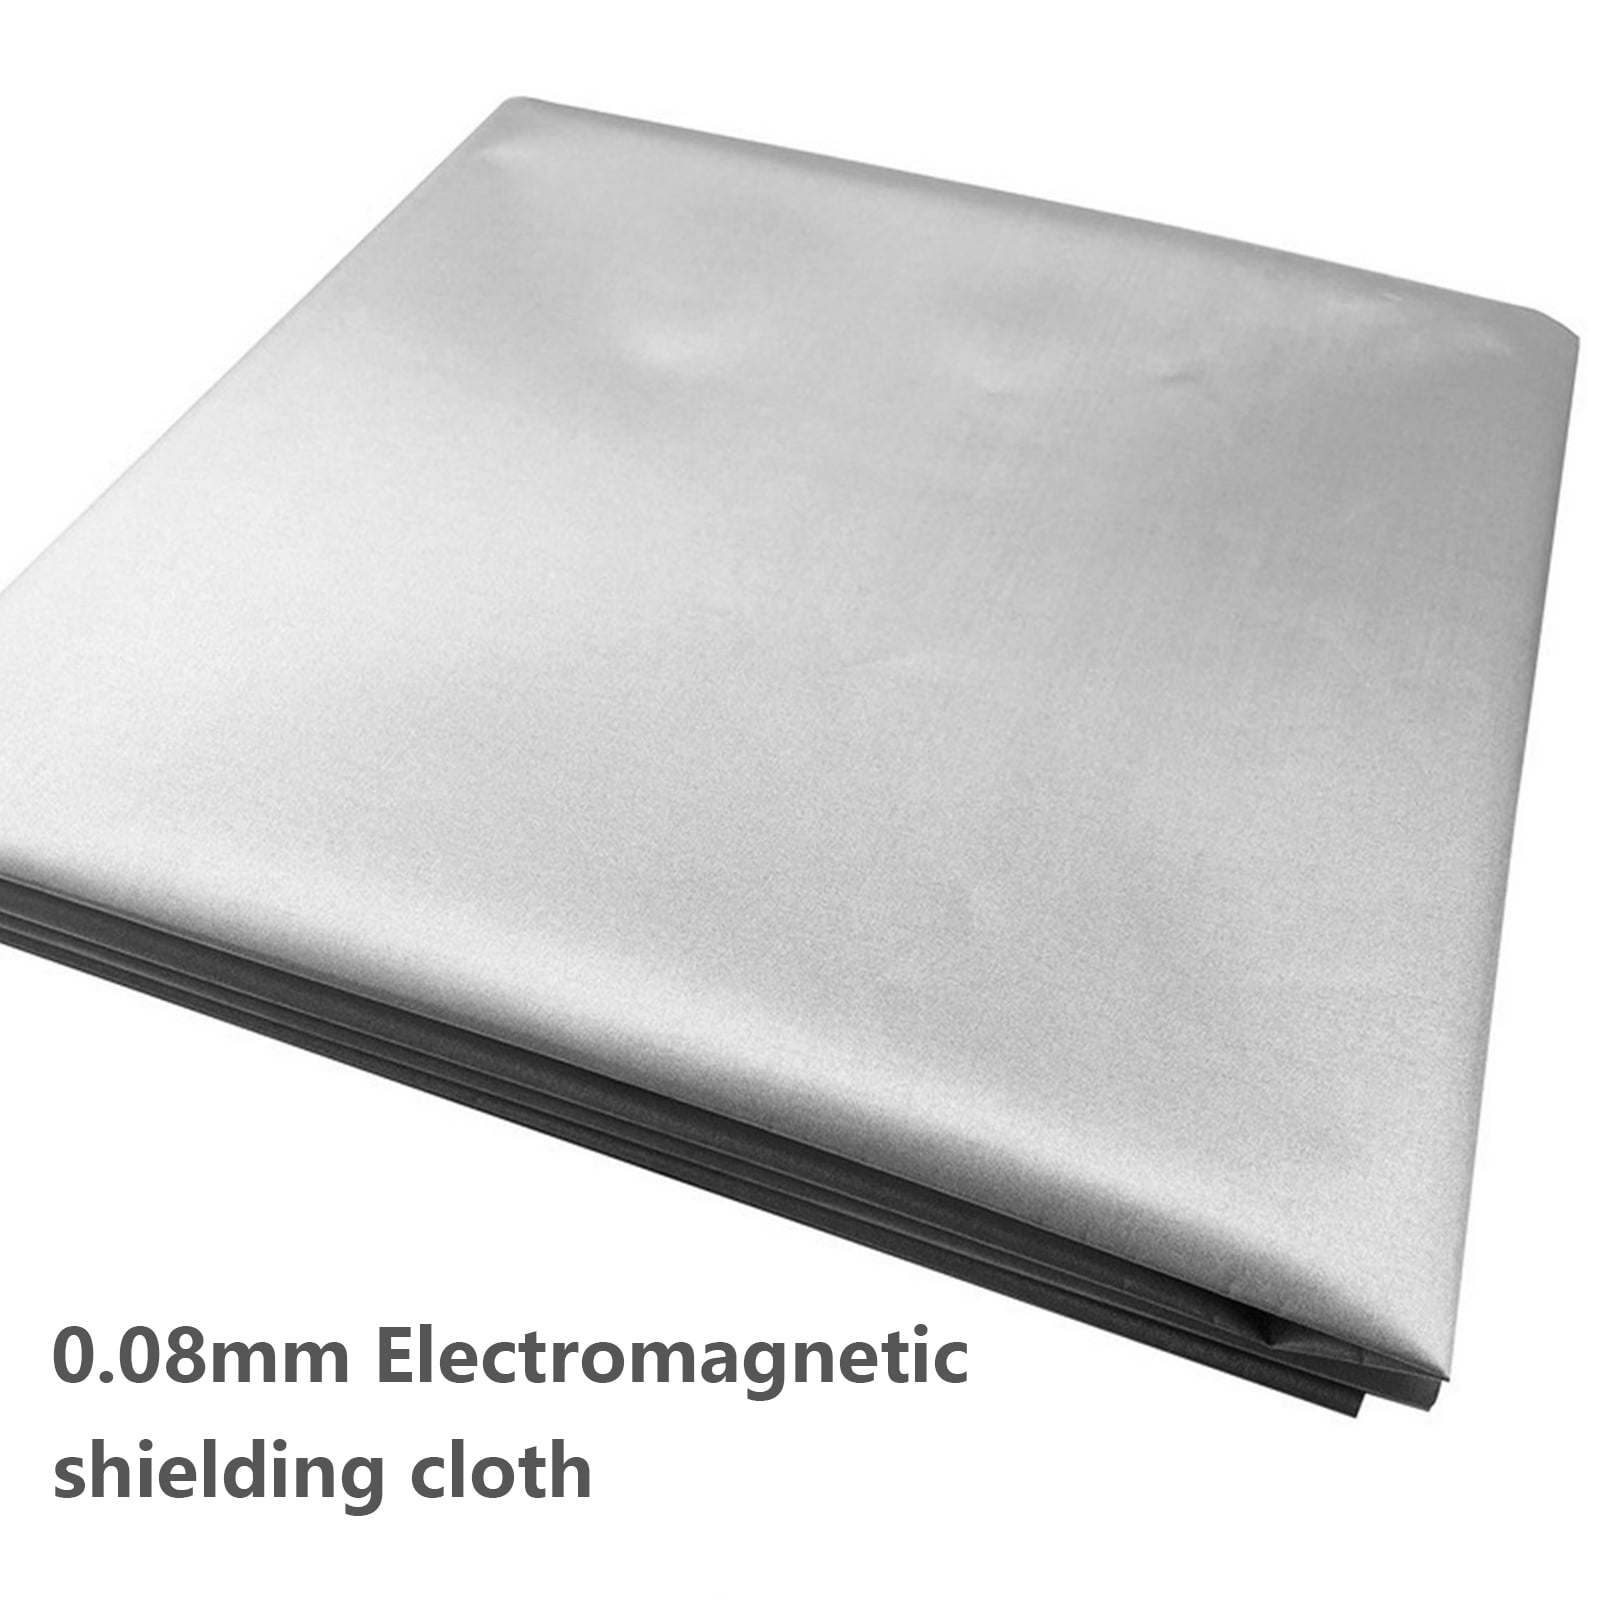 RFID Blocking Material Making shielded Tents to Shield Radiation